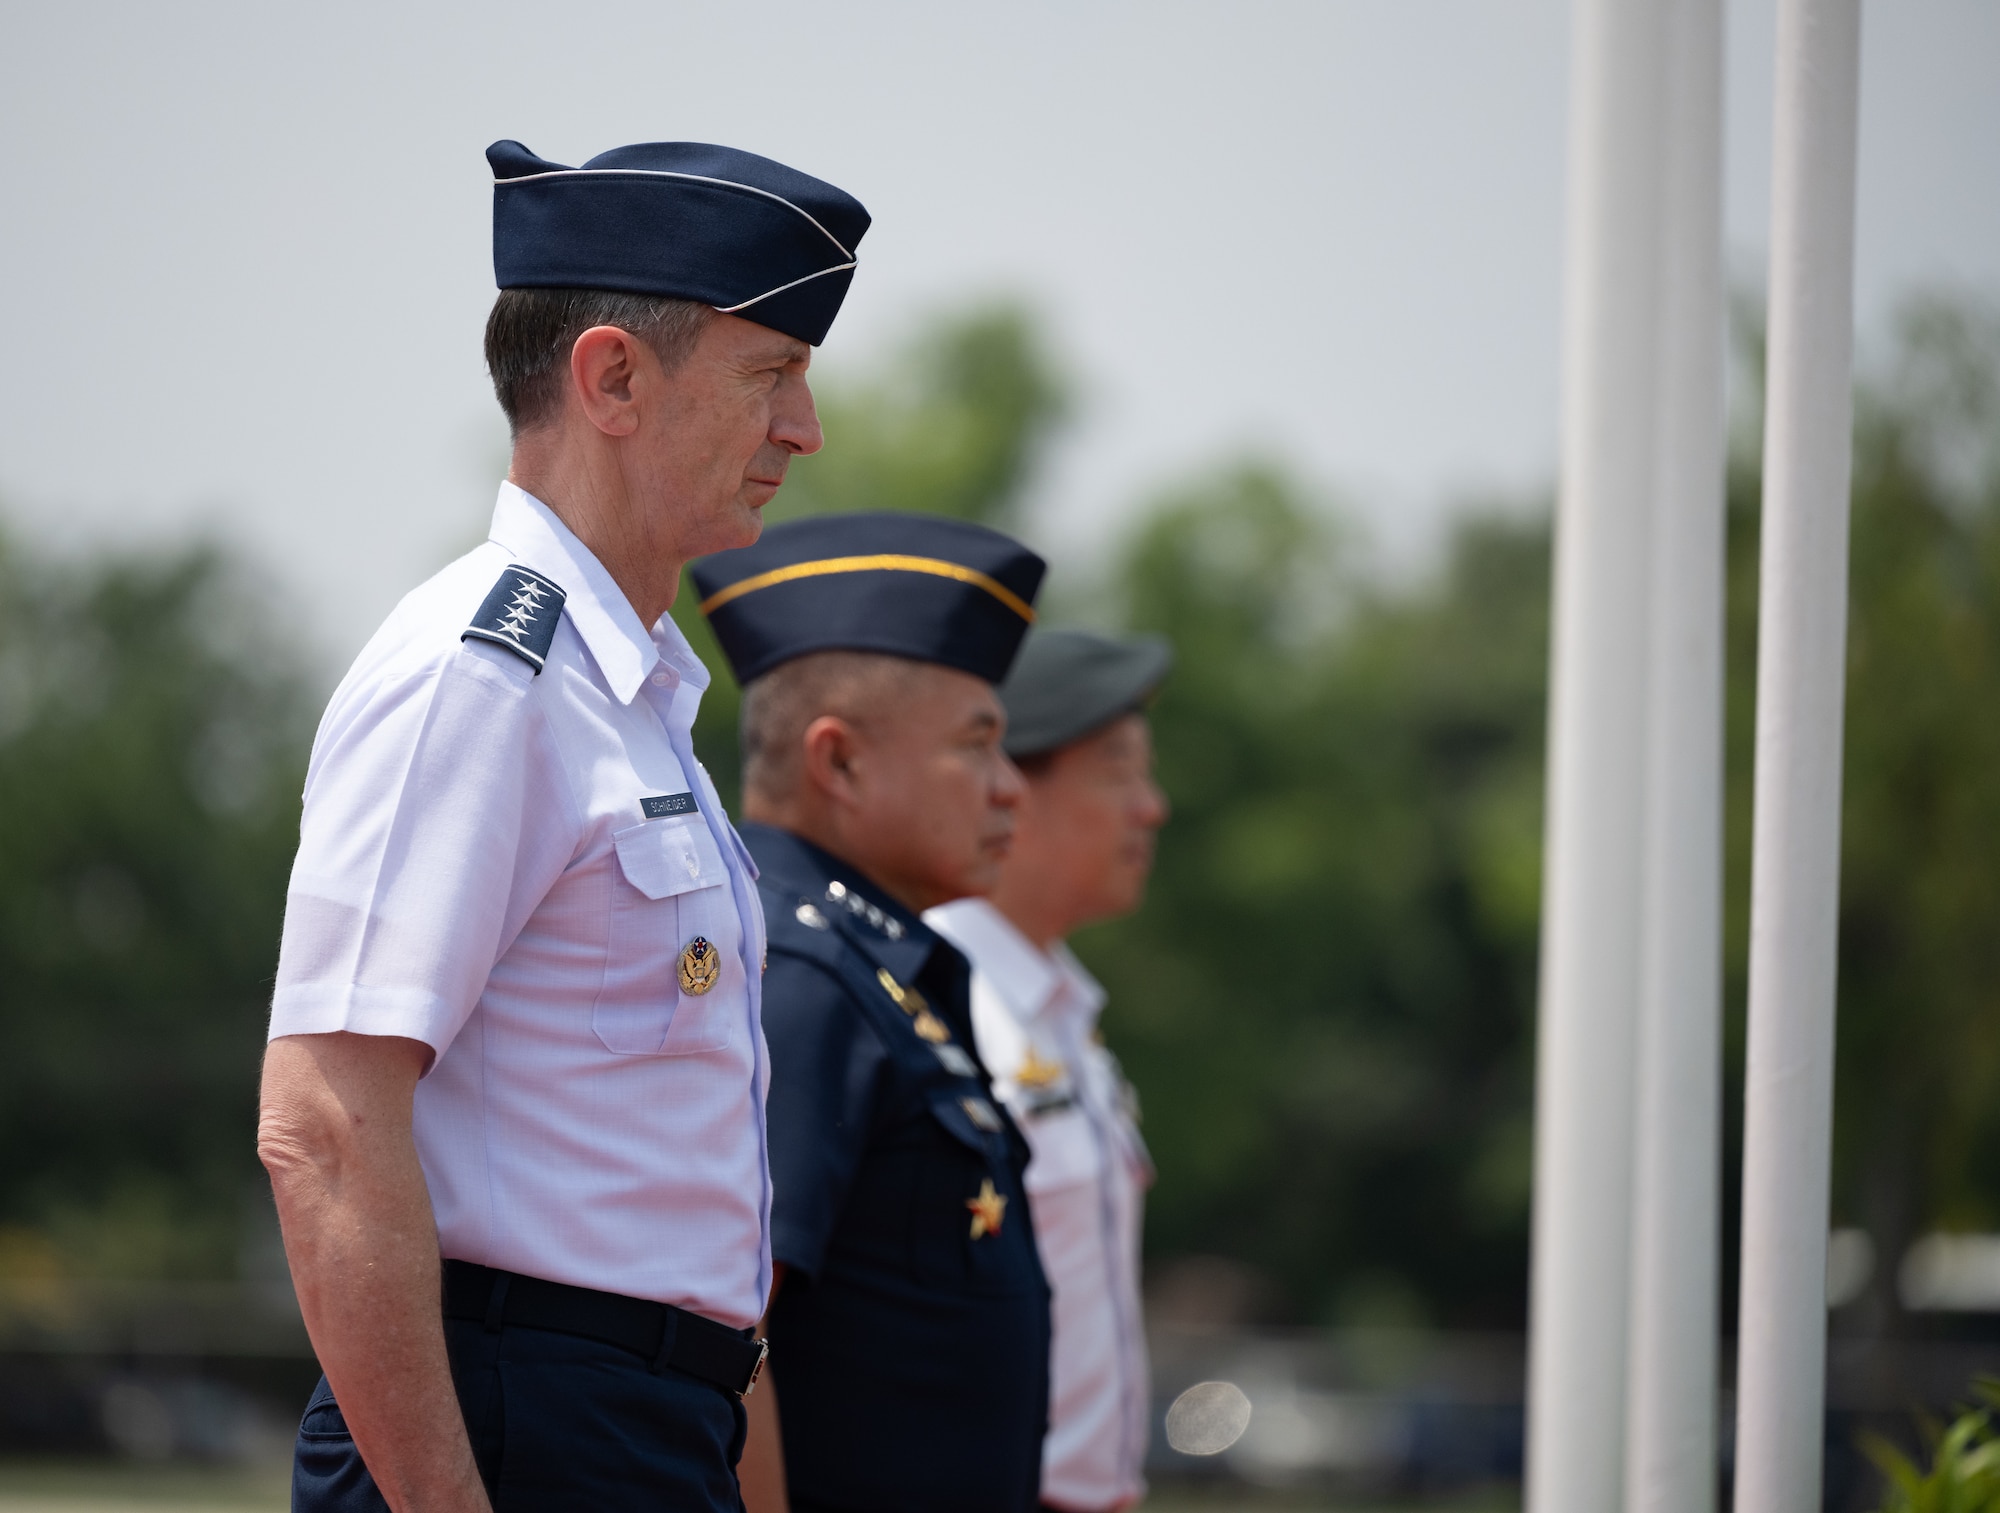 U.S. Air Force Gen. Kevin Schneider, Pacific Air Forces commander, attends the closing ceremony for Cope Tiger 2024 alongside Royal Thai Air Force Air Chief Marshal Punpakdee Pattanakul, Commander-in-Chief, and Republic of Singapore Air Force Brig. Gen. Kelvin Fan, Chief of Air Force, at Korat Royal Thai Air Force Base, Thailand, March 29, 2024. Through trilateral training, we work together to promote interoperability, thus furthering our investments and strengthening our relationships. (U.S. Air Force photo by Tech. Sgt. Hailey Haux)